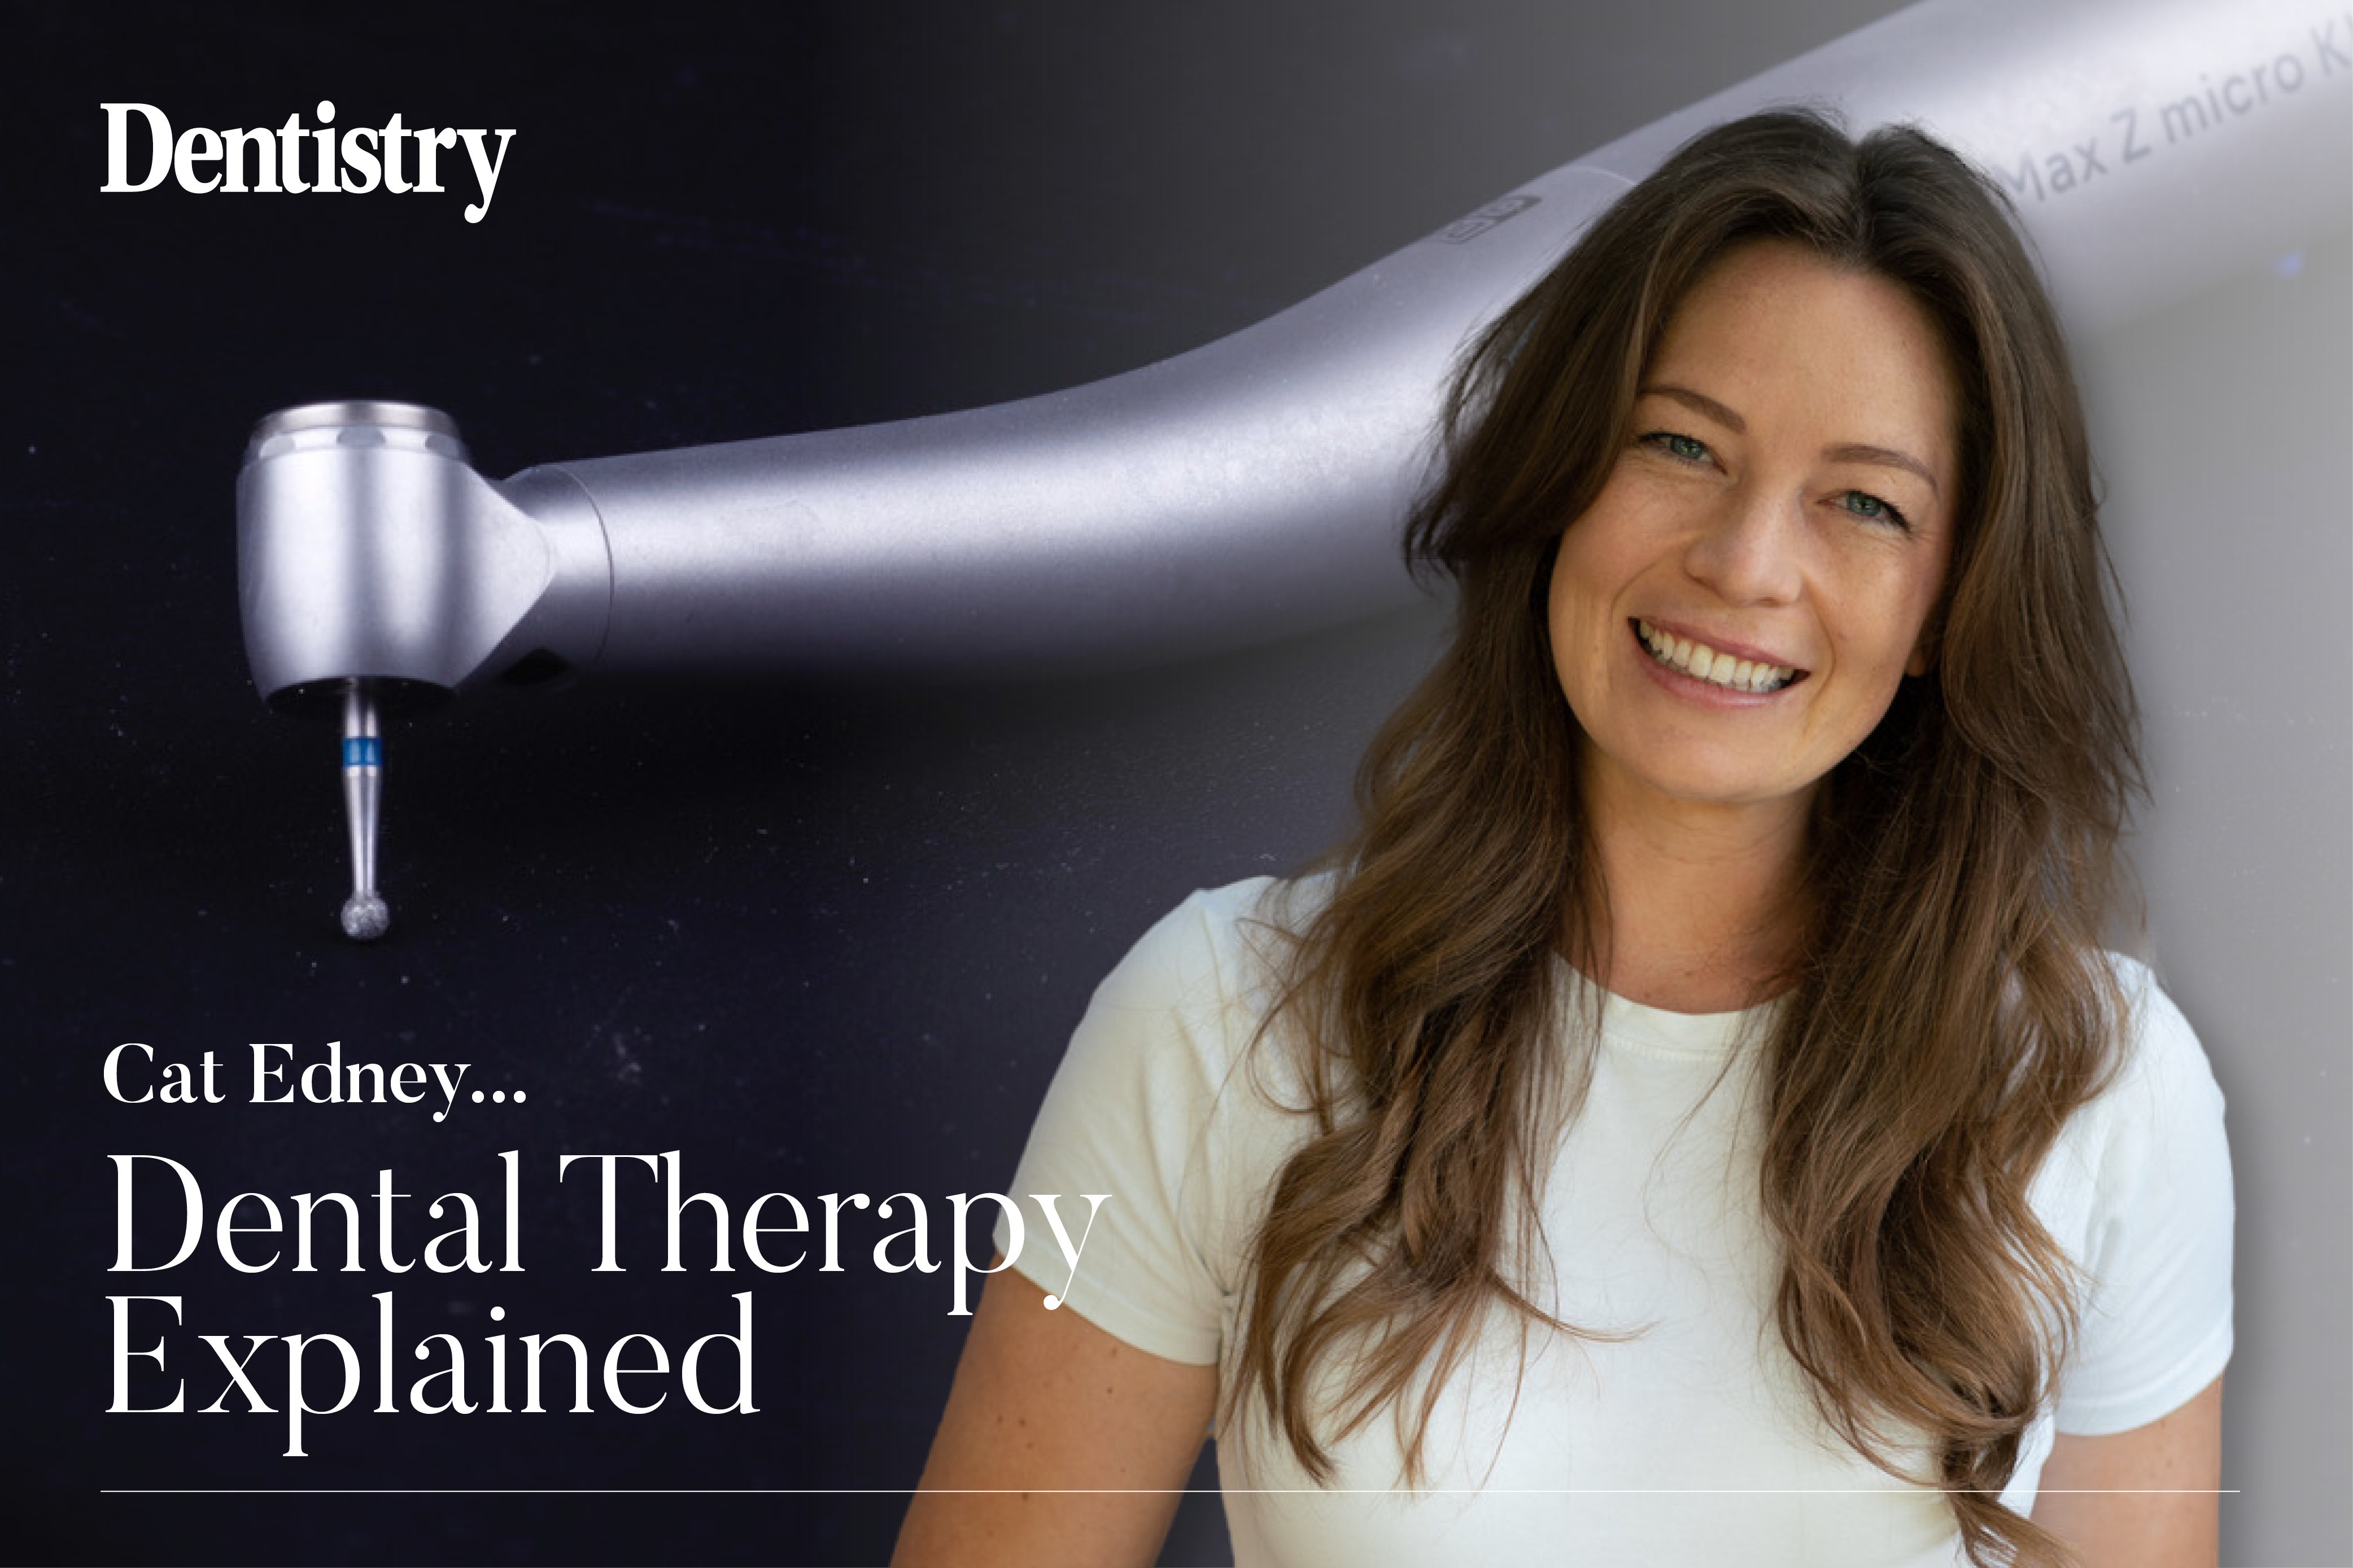 Cat Edney discusses education and personal development for dental therapists